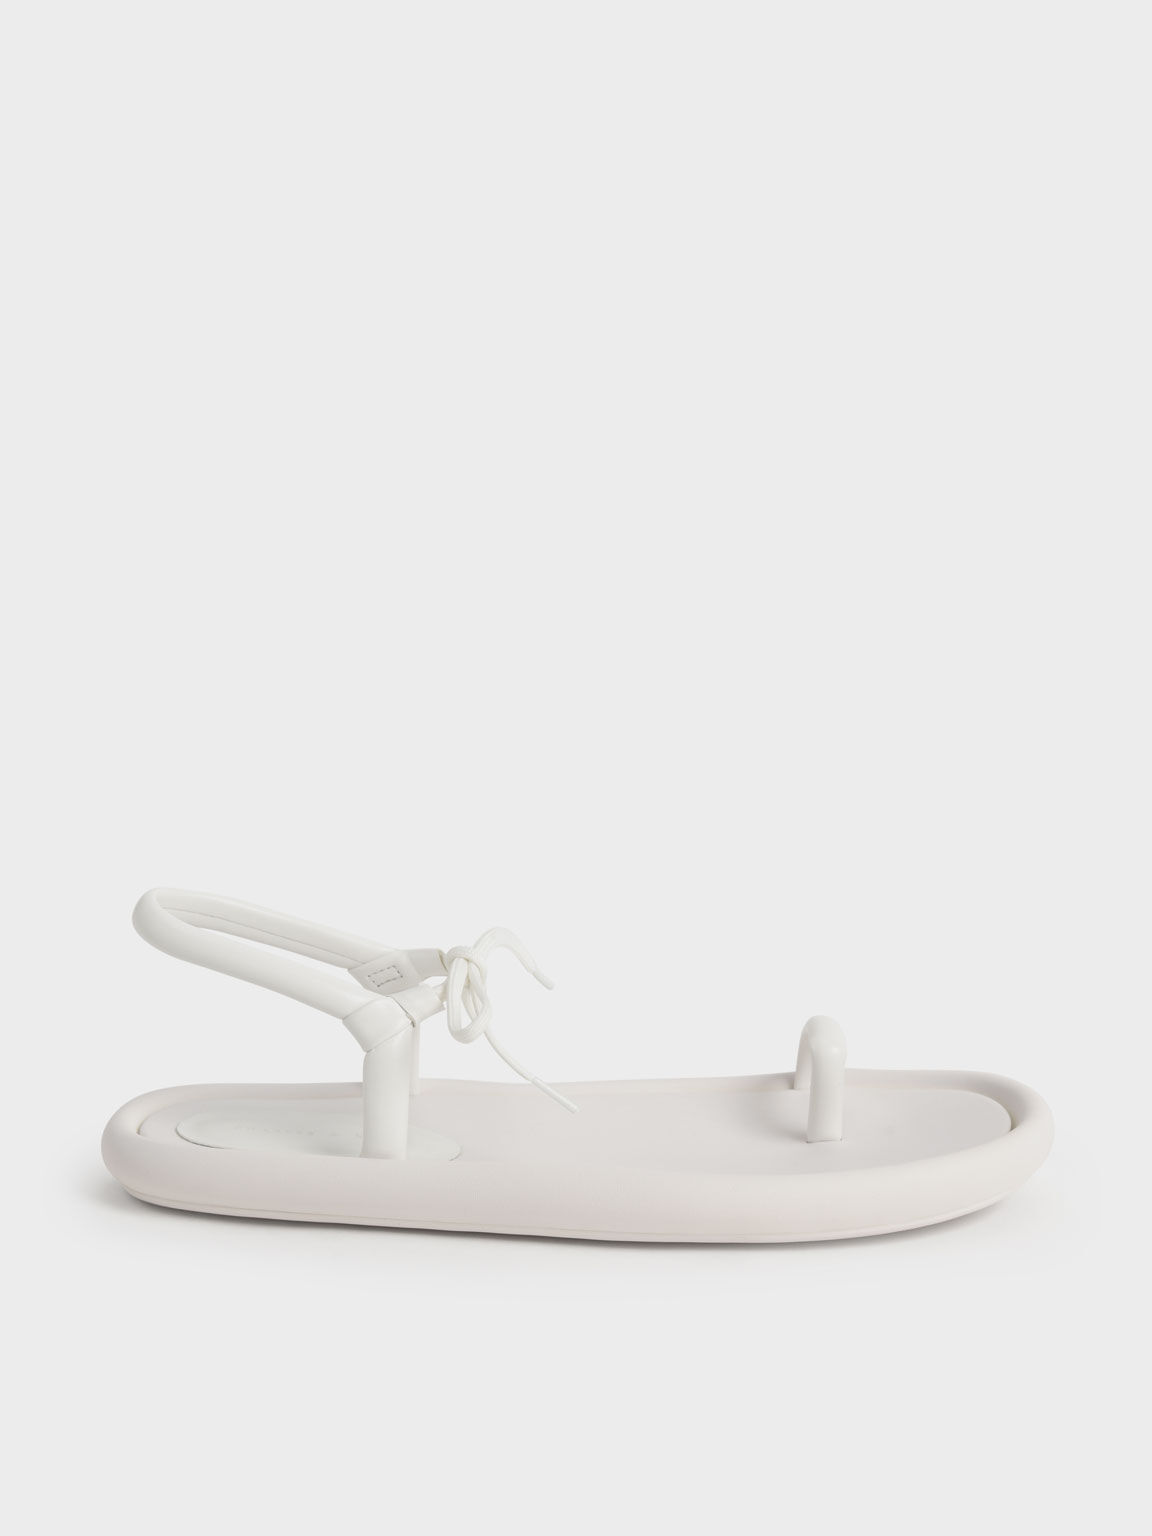 Austell Bow-Tie Toe-Ring Padded Sandals, White, hi-res